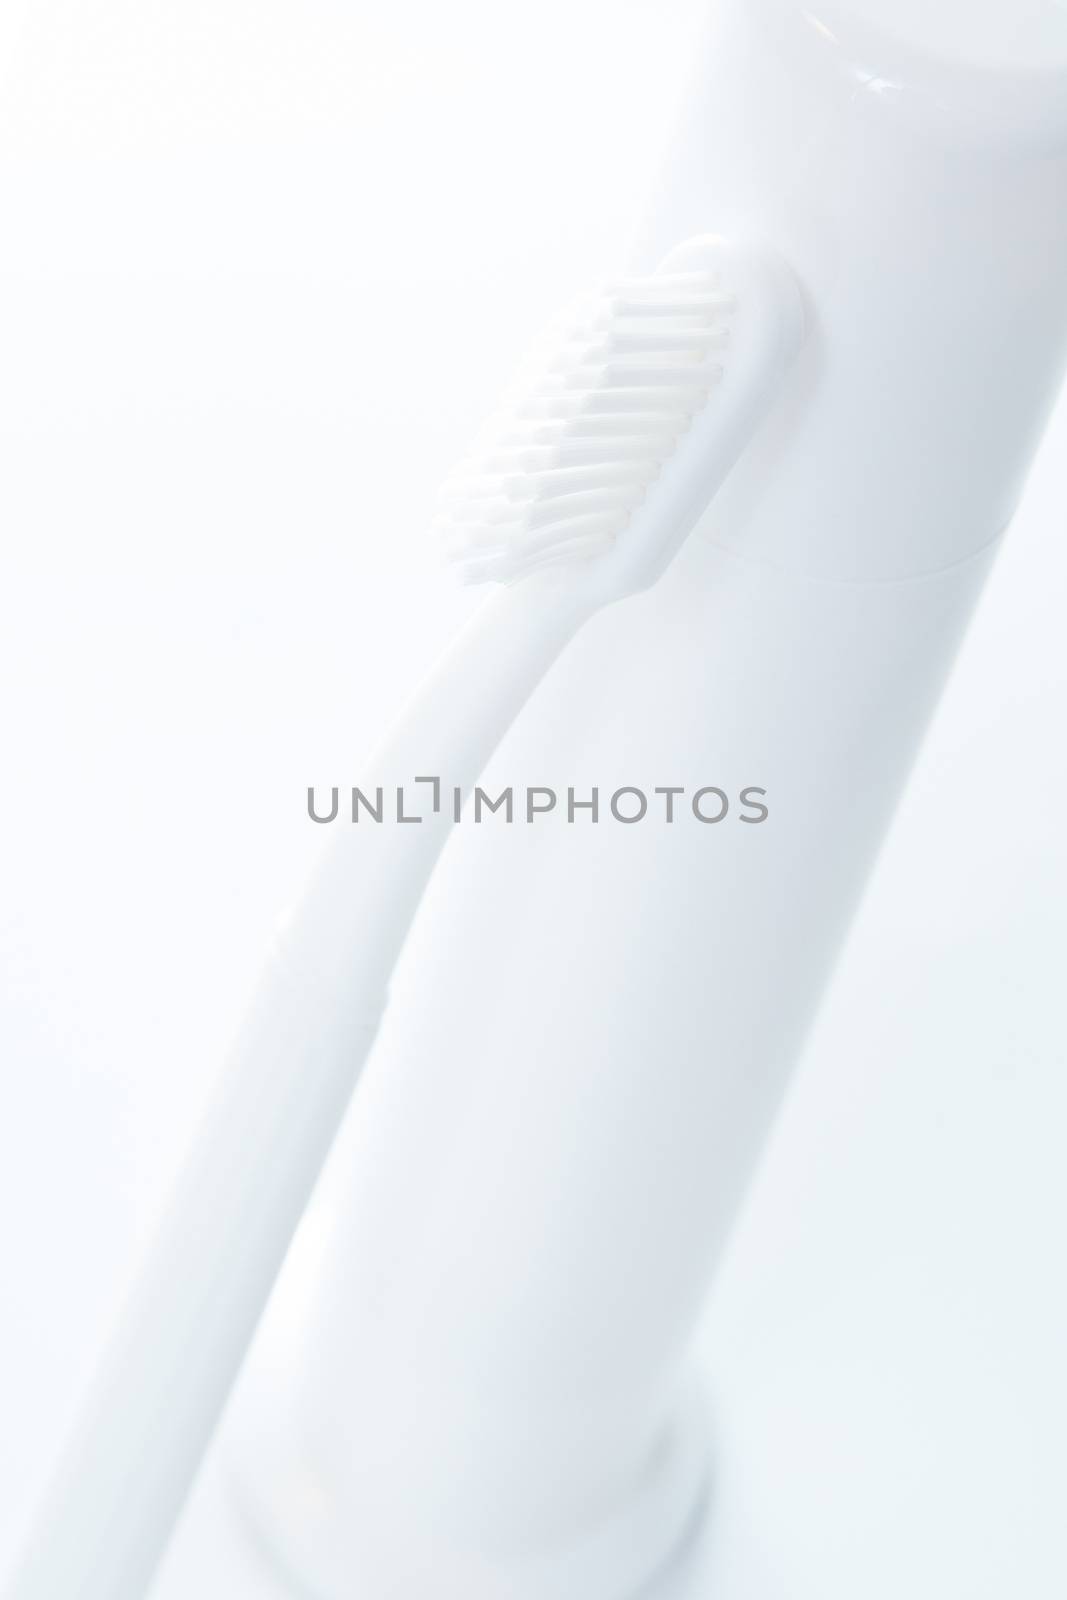 Toothpaste and toothbrush over white. Shallow DOF.